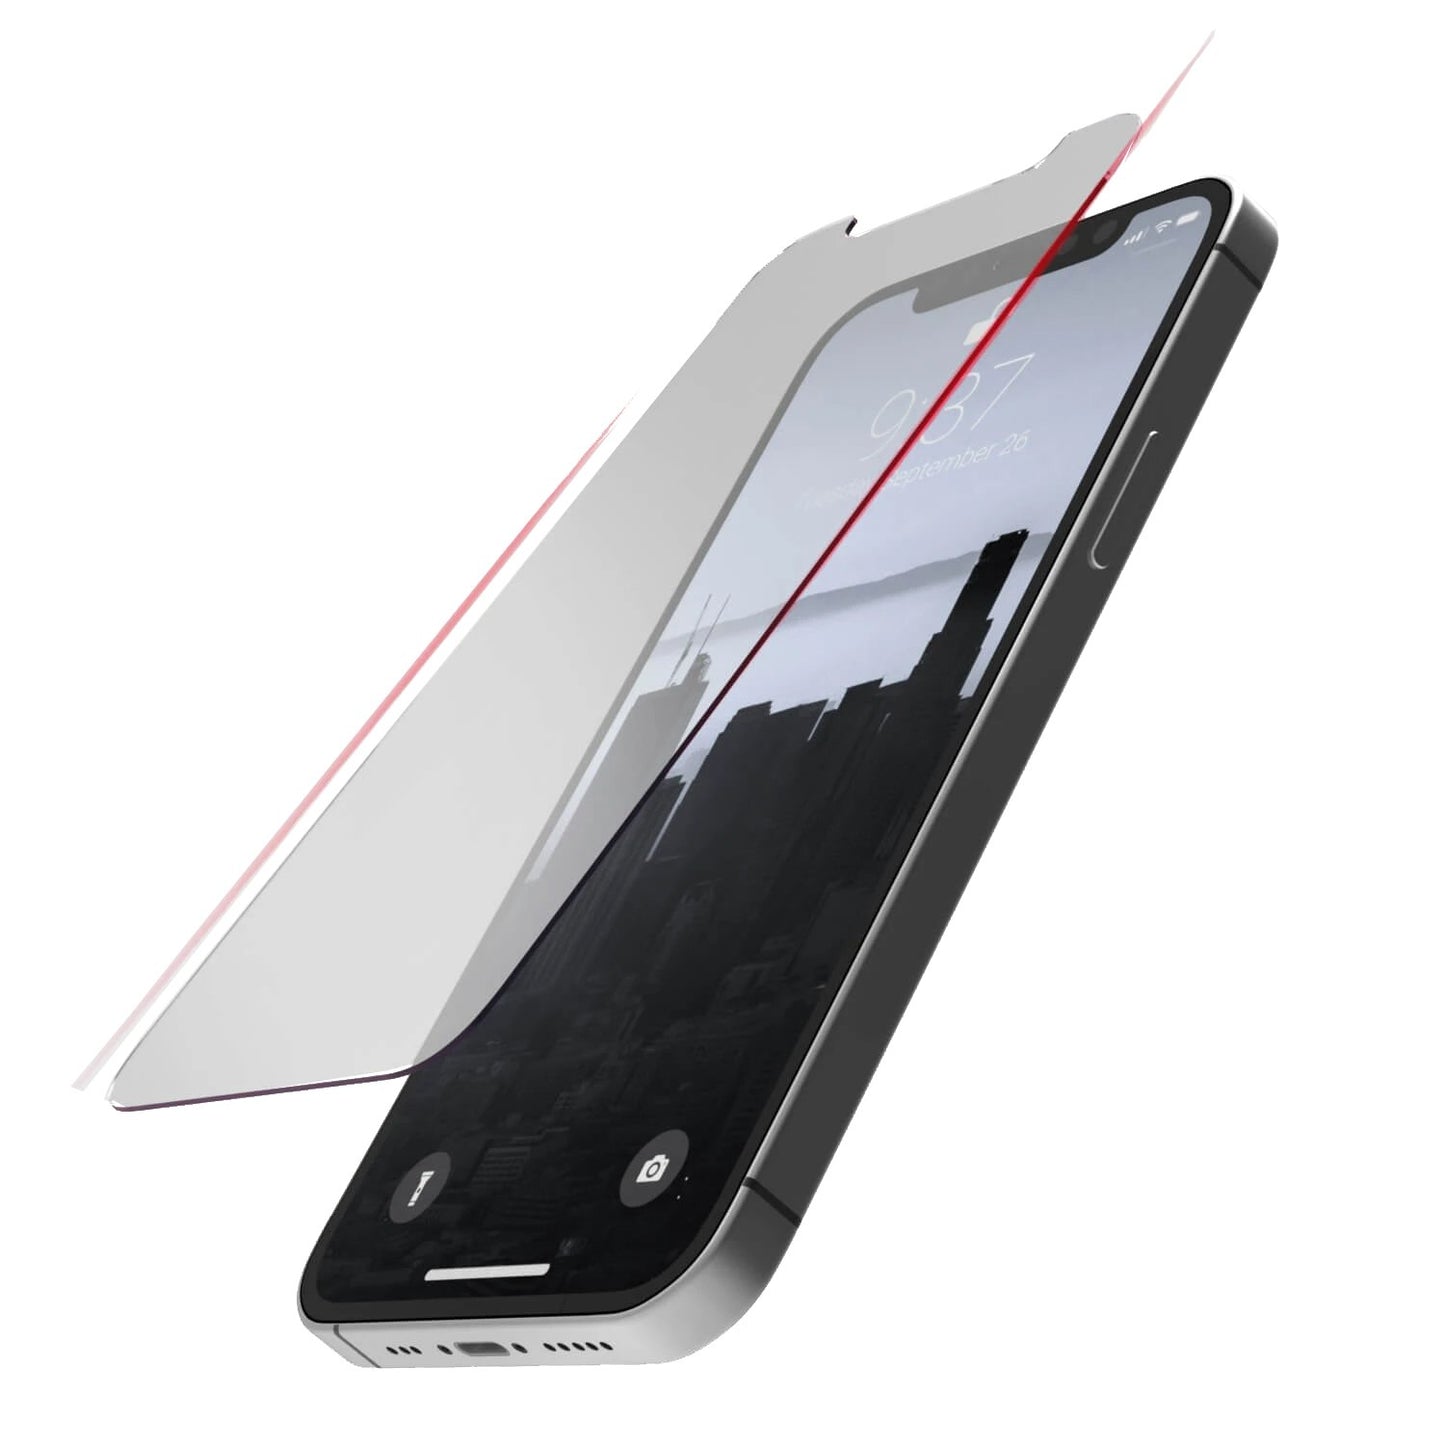 The aeon - iPhone 14 Full Cover Glass - Raptic Full Cover Glass is shown on a white background.